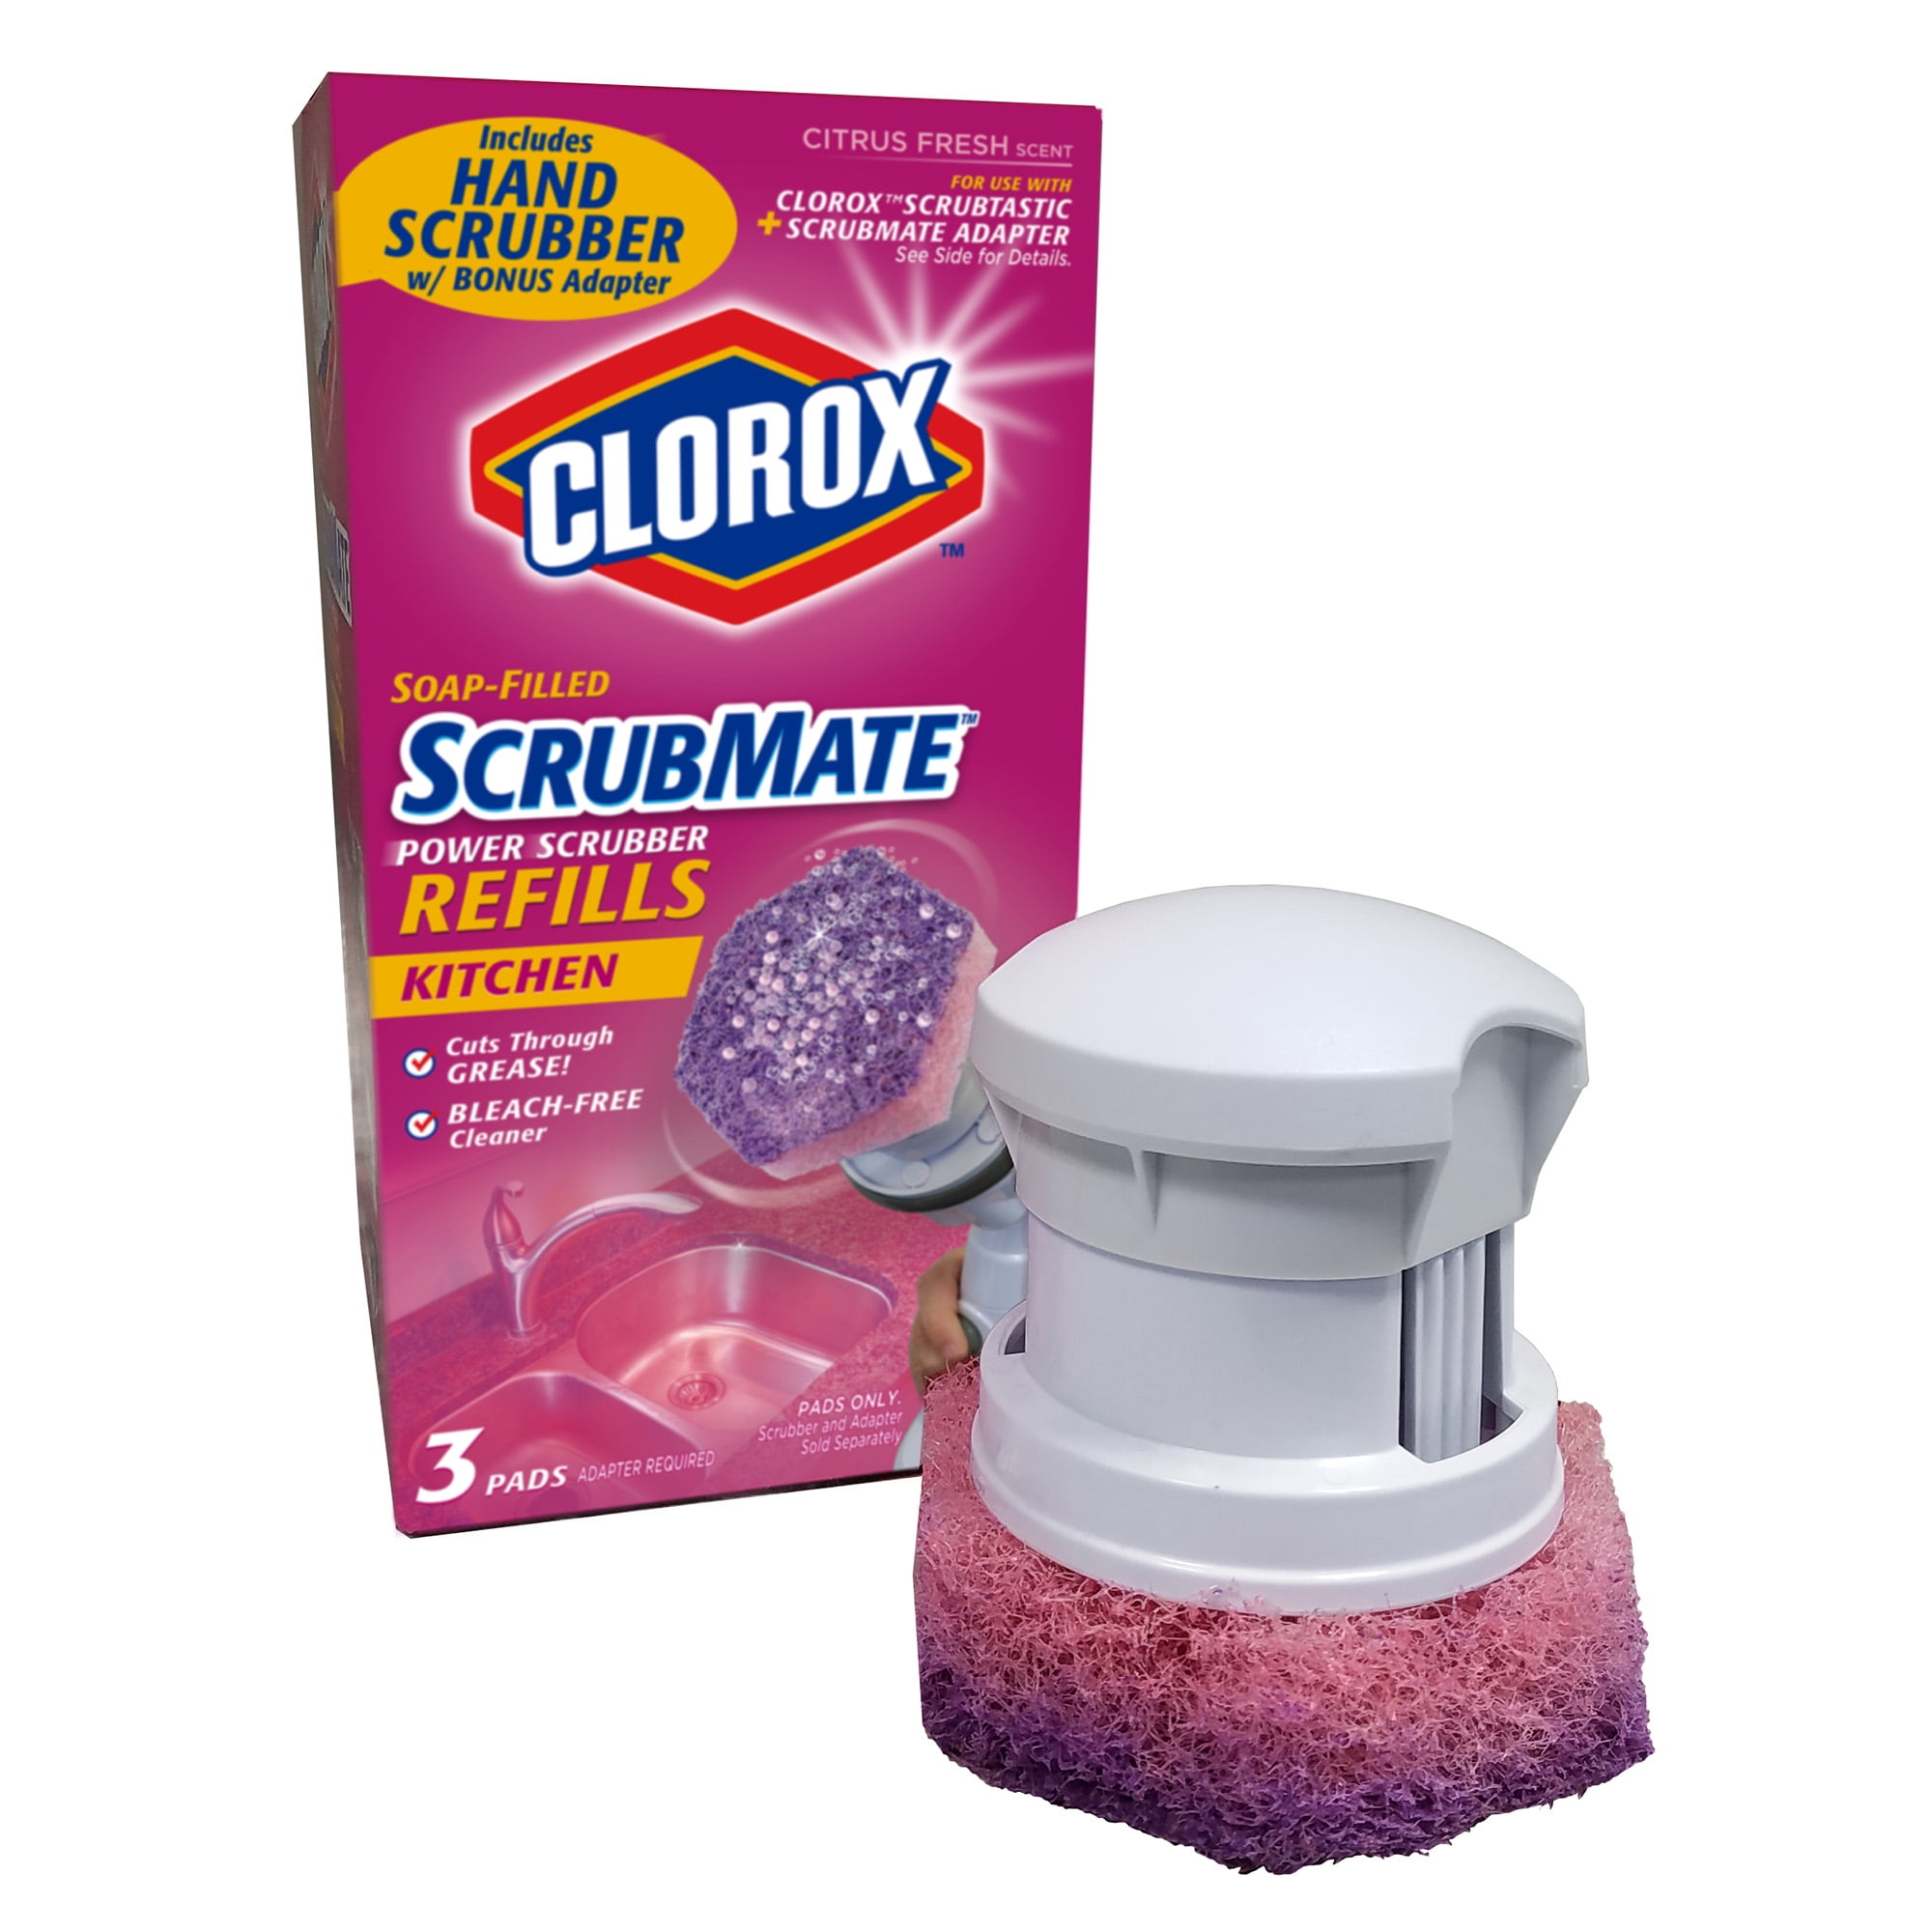 Clorox Tile & Grout Brush, 2 In 1 1 Ea, Cleaning Tools & Sponges